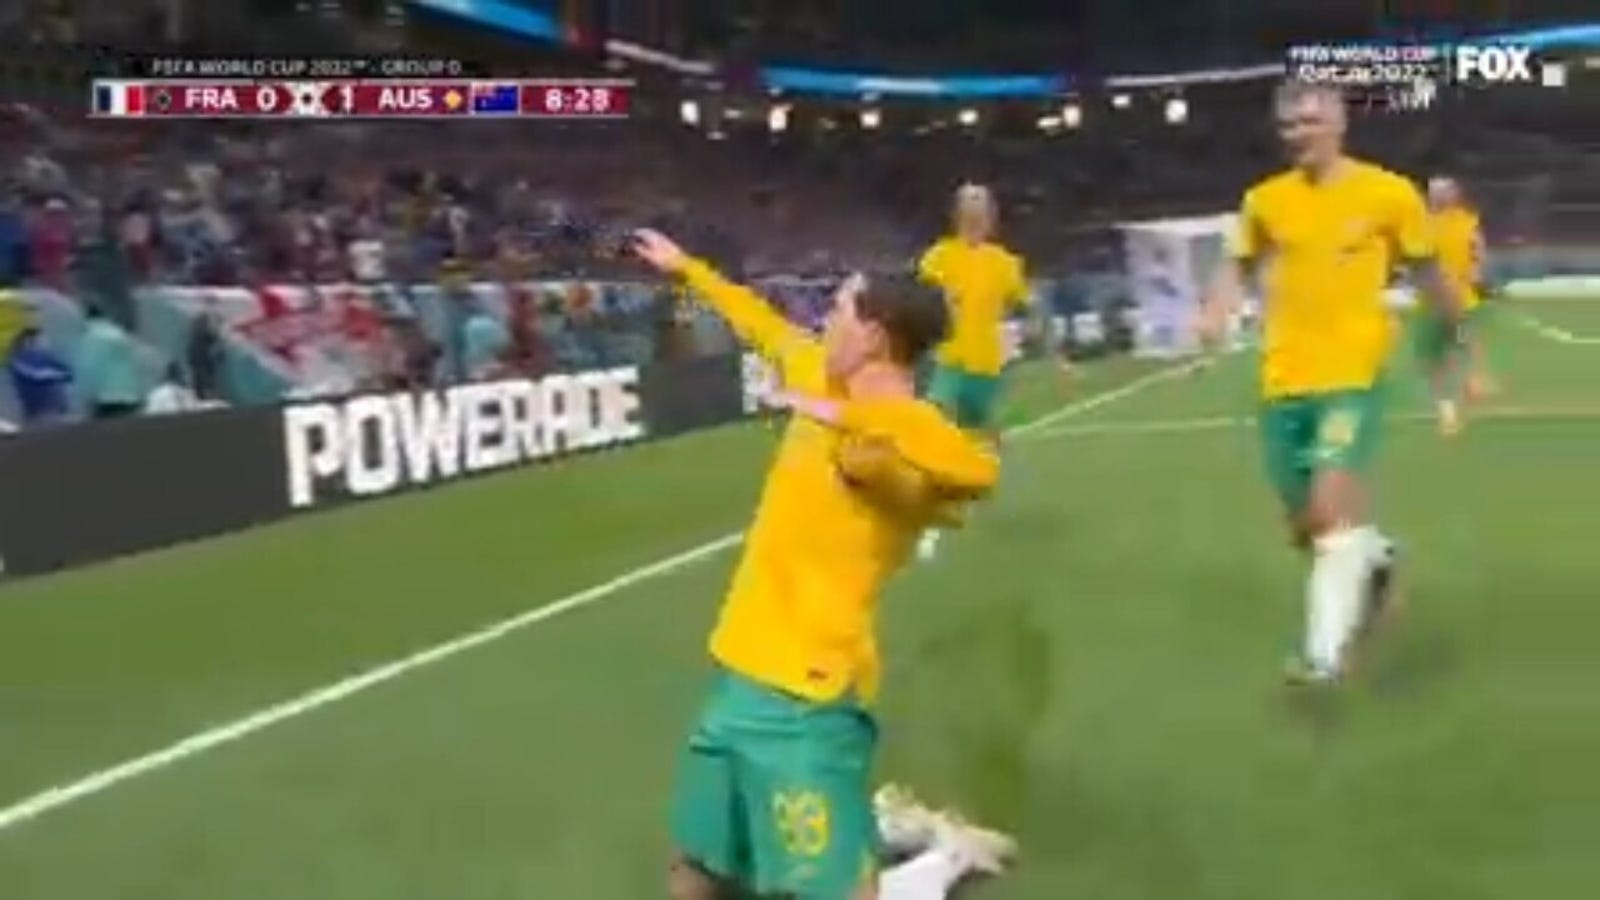 Craig Goodwin scored his first goal in the 9th minute, giving Australia a 1-0 lead over France 